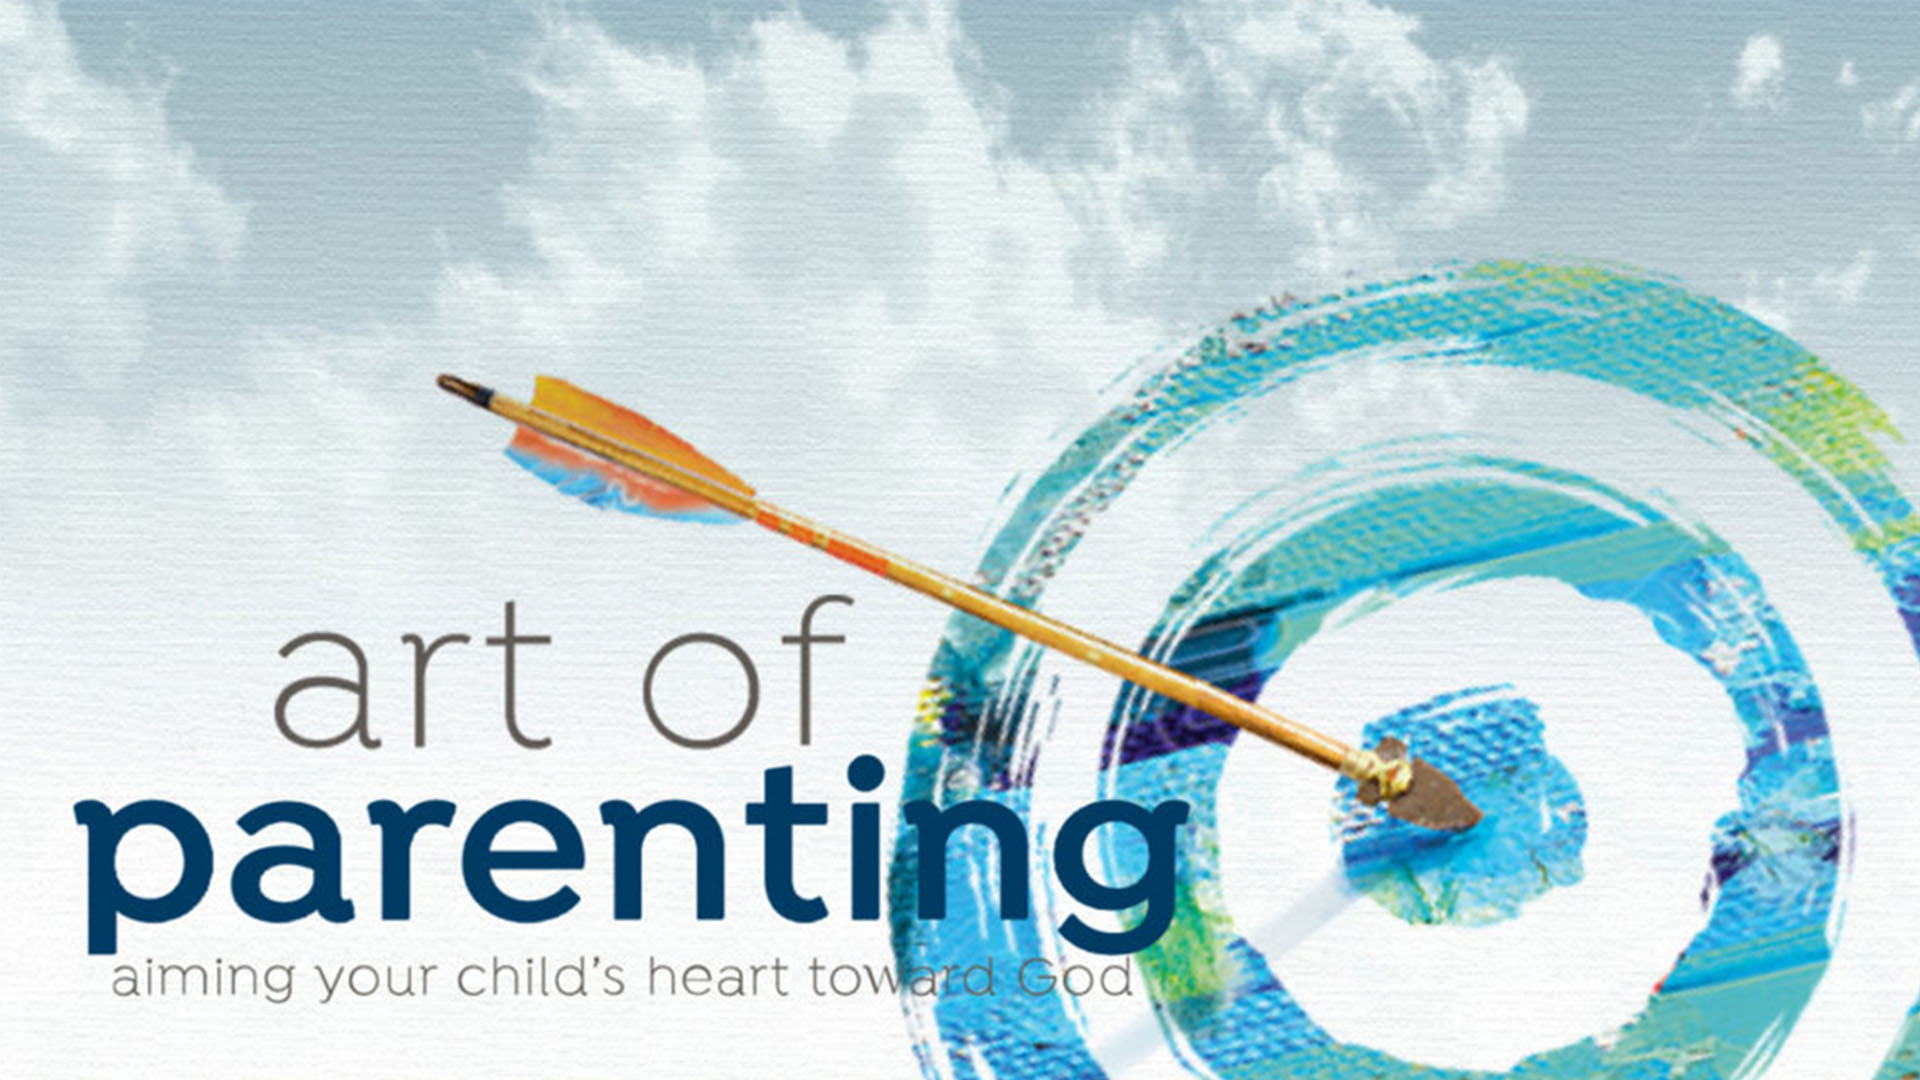 The Art Of Parenting

8-Week Series 
Next session to be determined
Childcare provided
